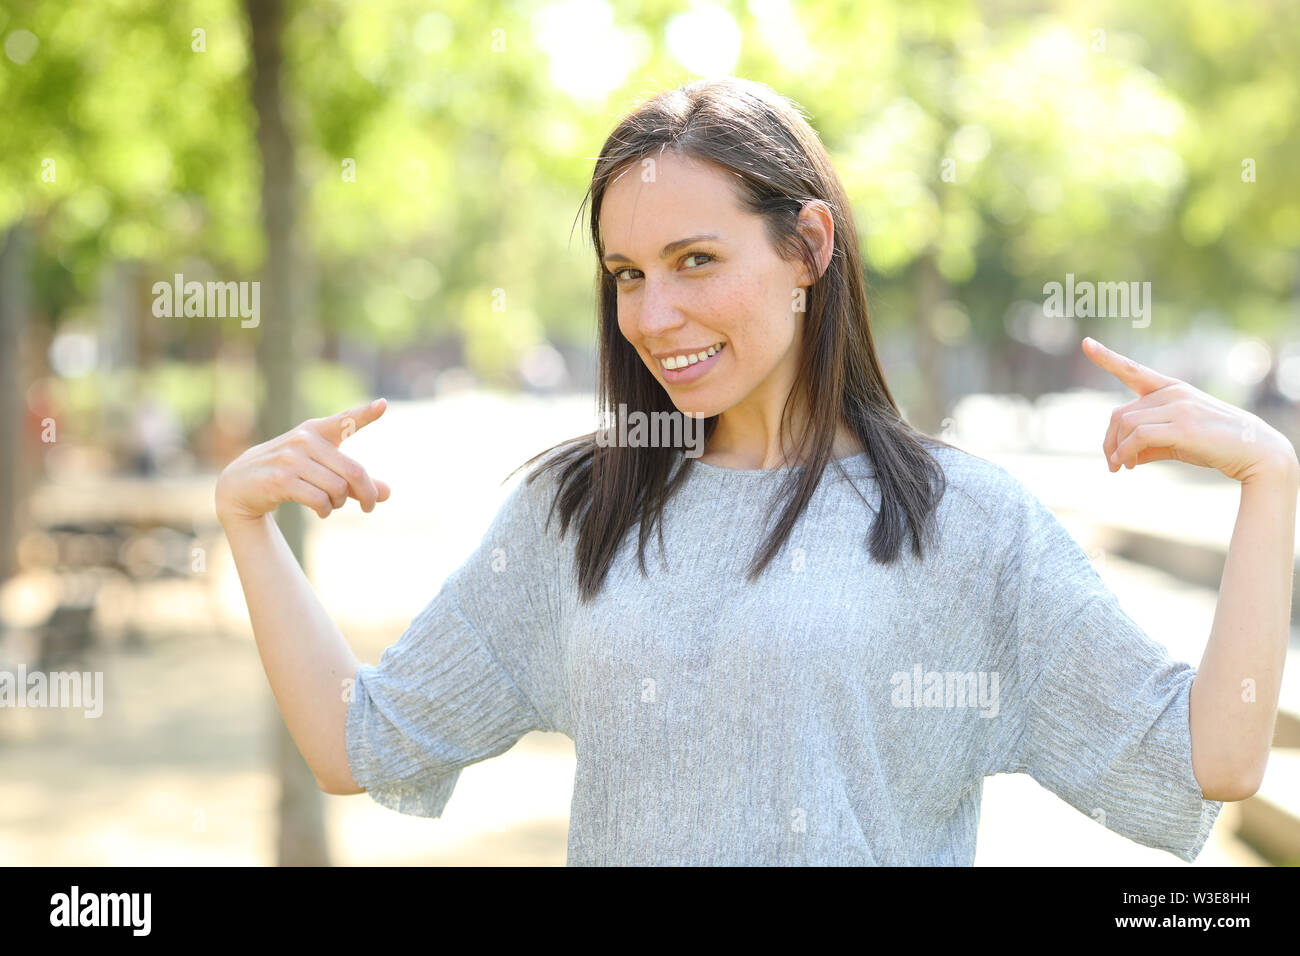 Proud woman pointing herself with both hands standing in a park Stock Photo